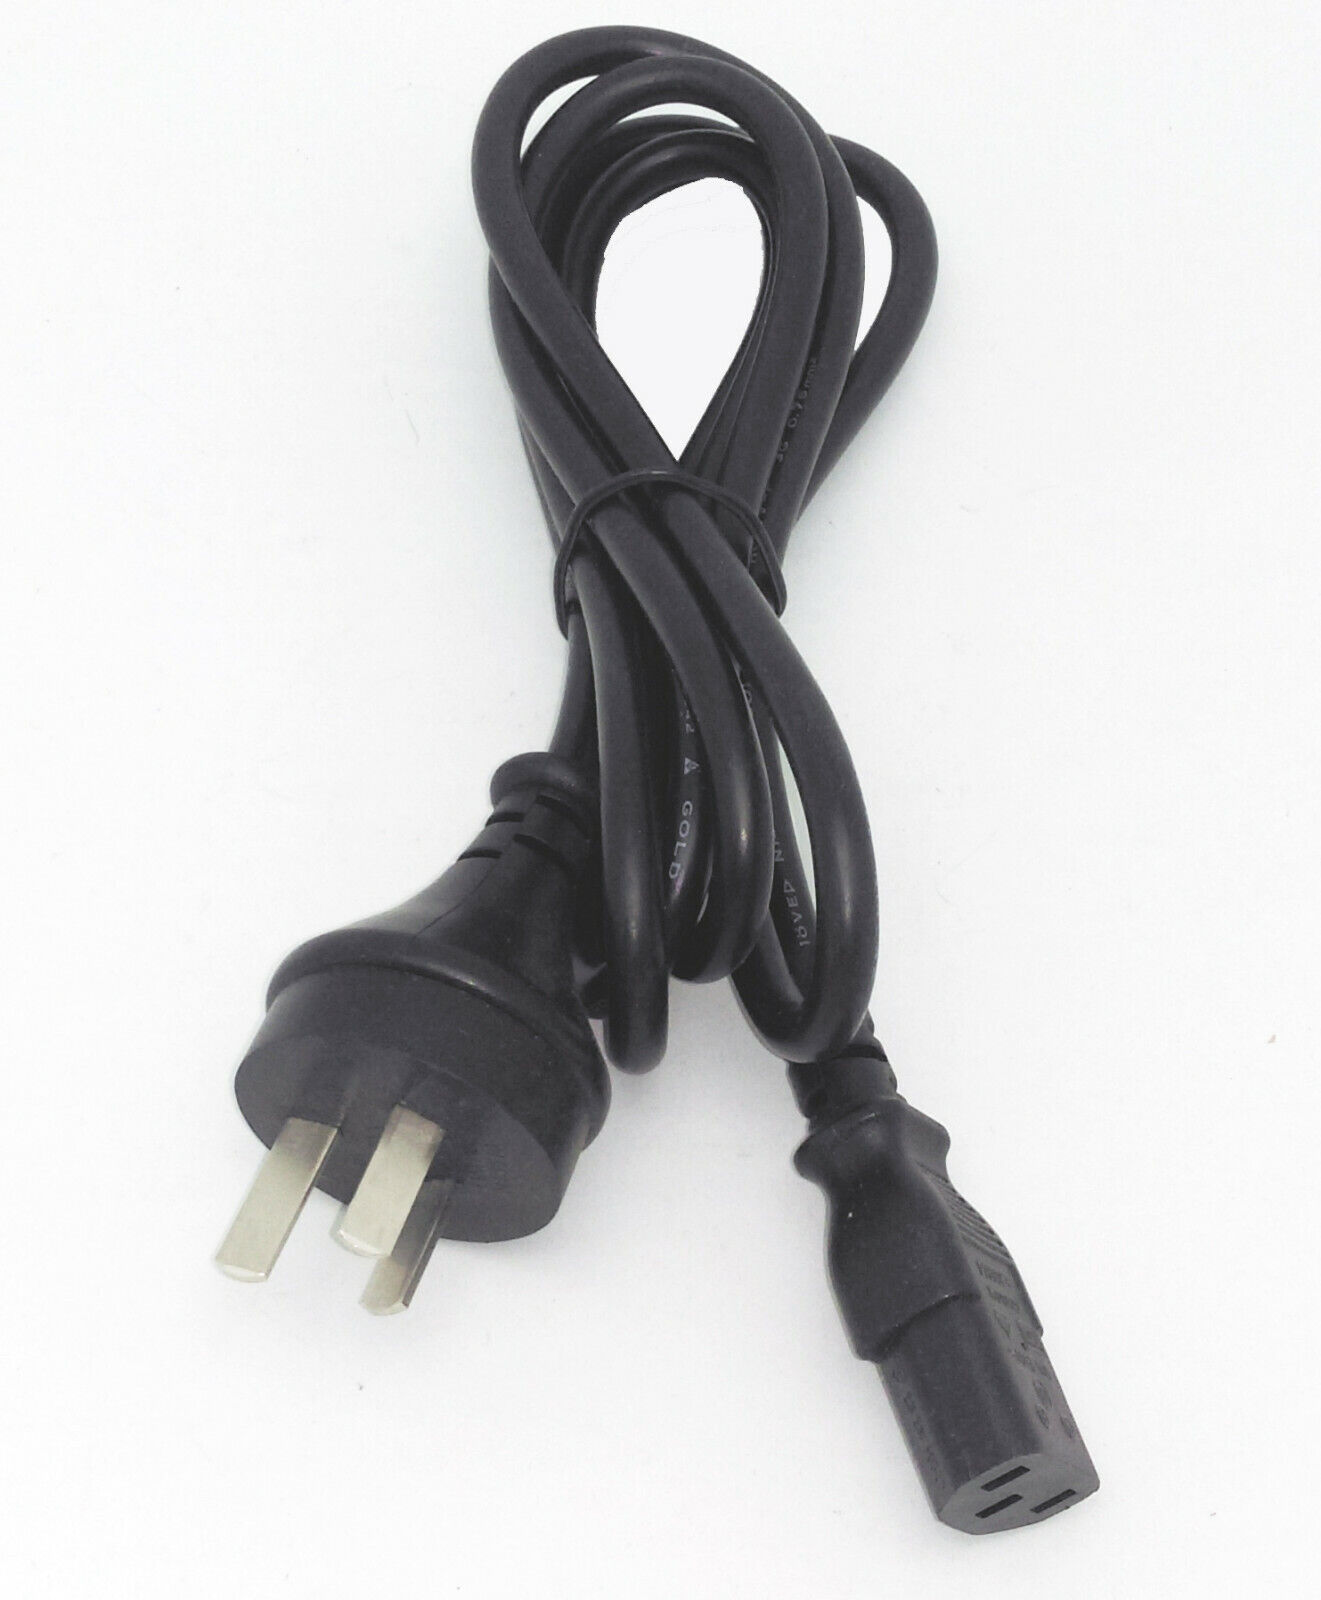 6FT Foreign AC Power Cord for Desktop Computer,Monitor,Printer,Dell/HP/Lenovo PC